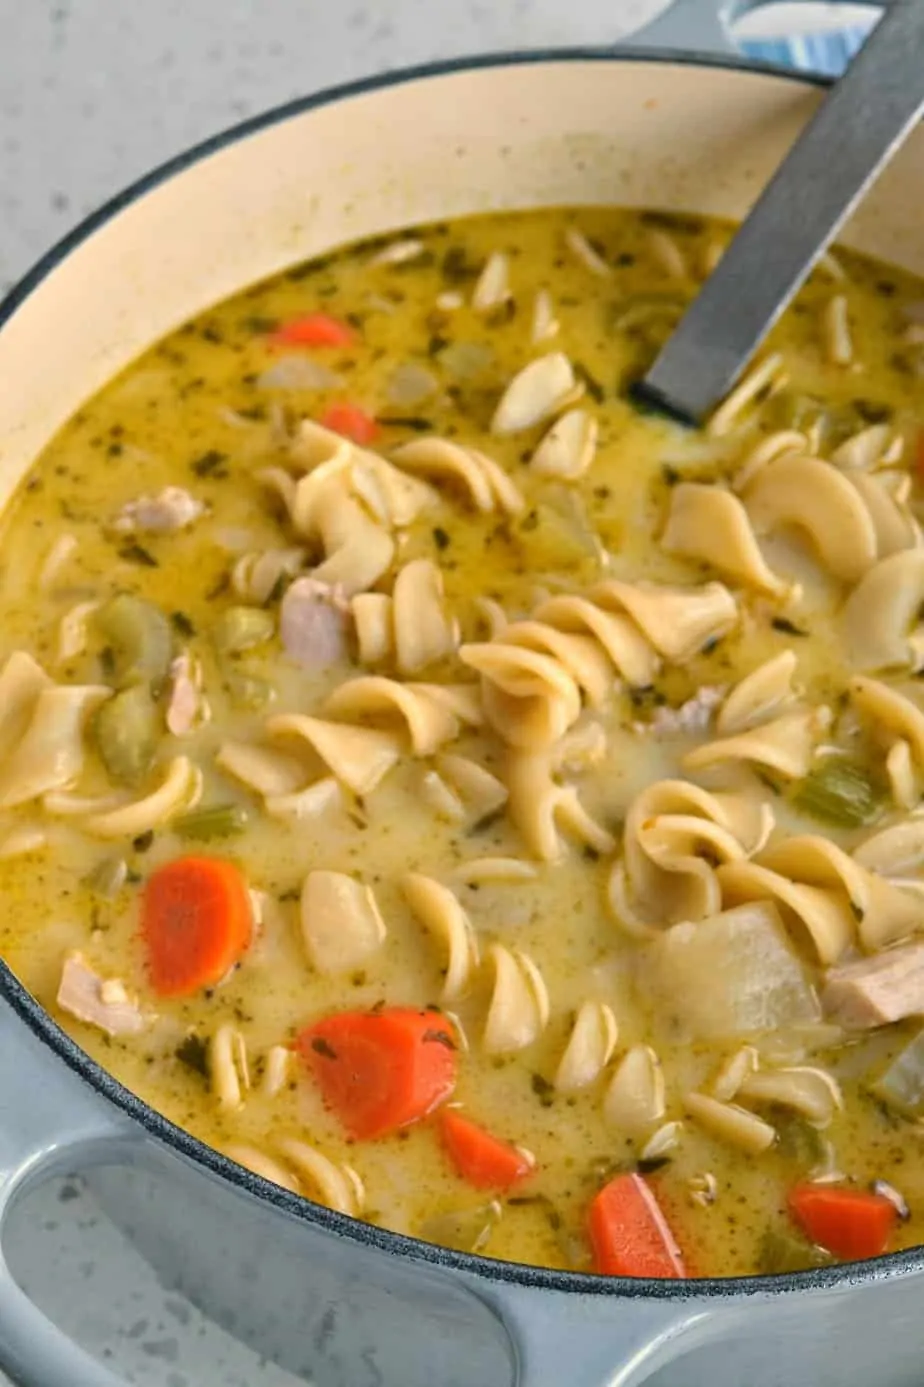 Deep South Dish: Mary's Basic Homemade Chicken Noodle Soup